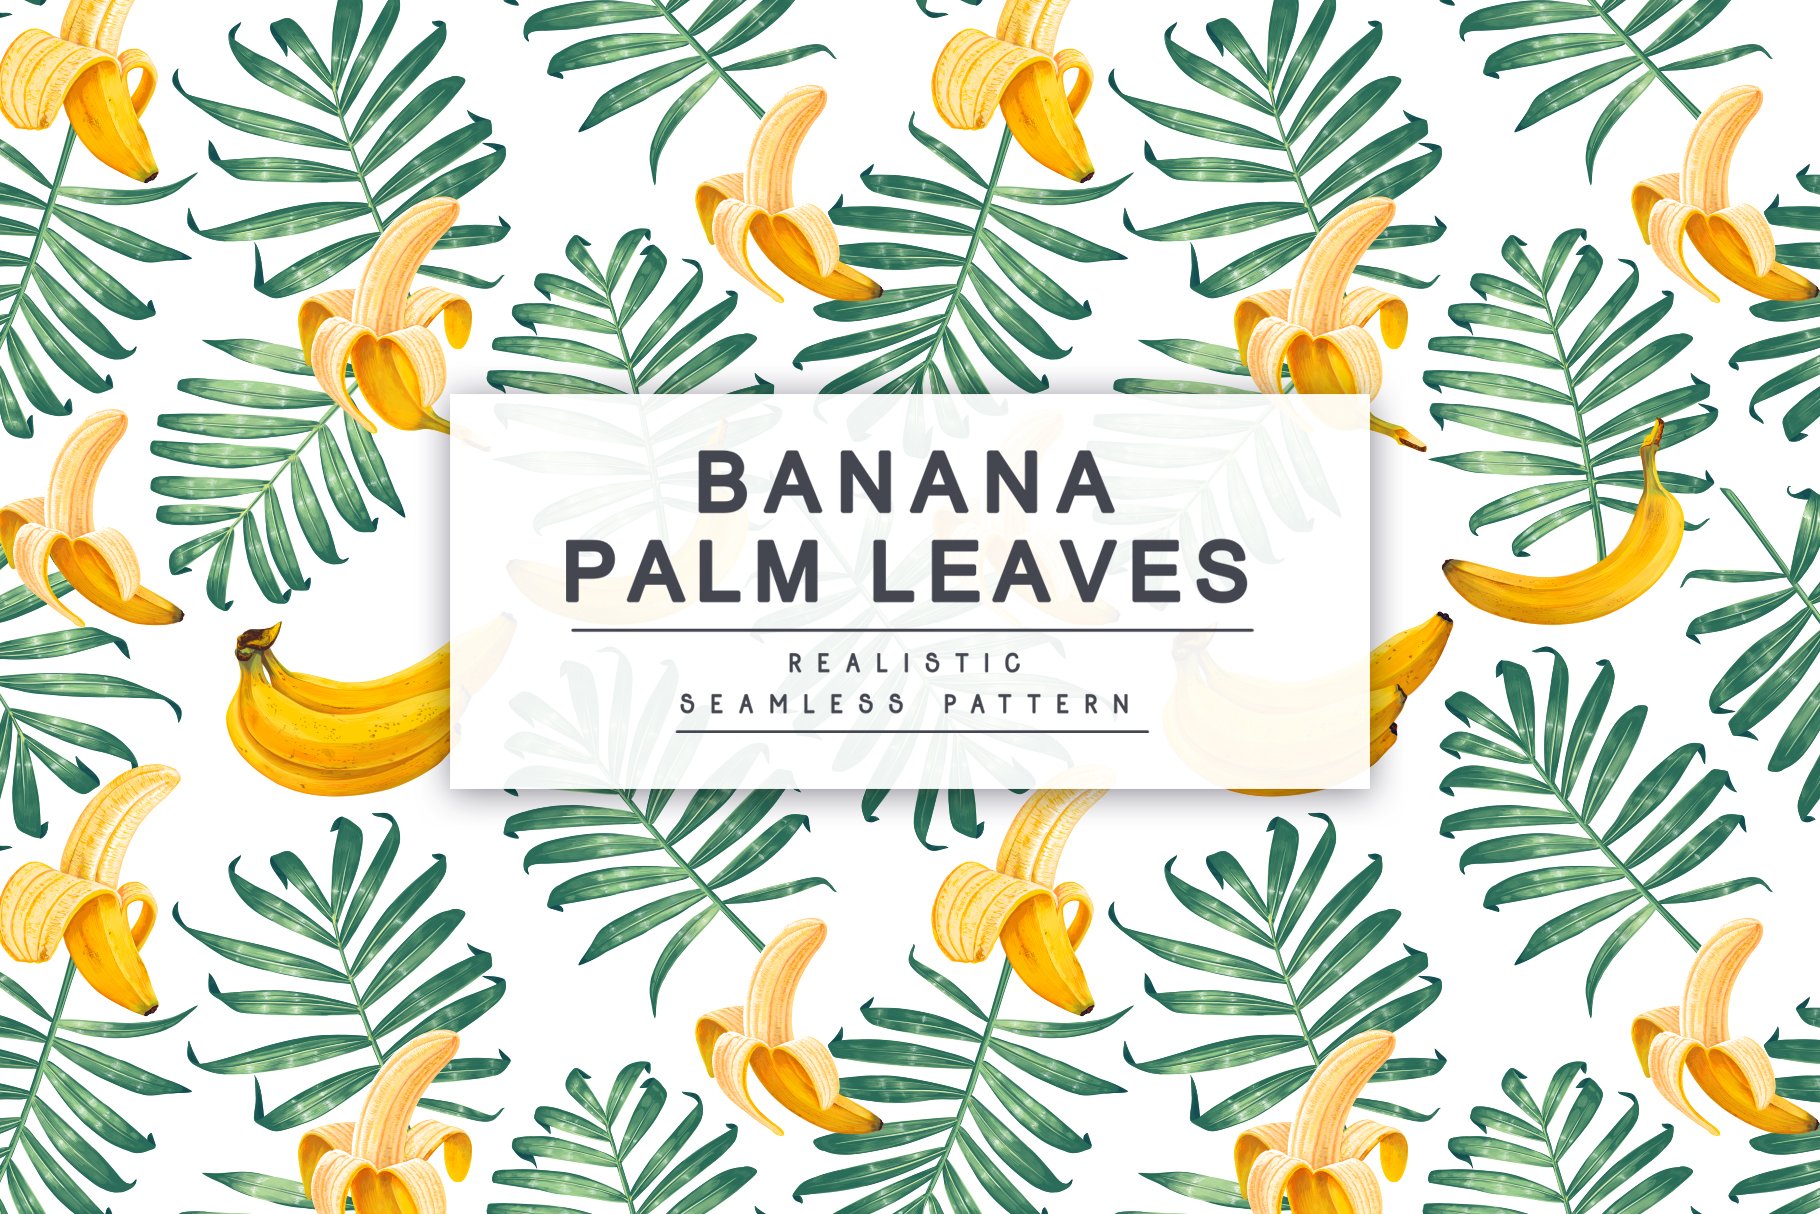 "Banana Palm Leaves" Pattern cover image.